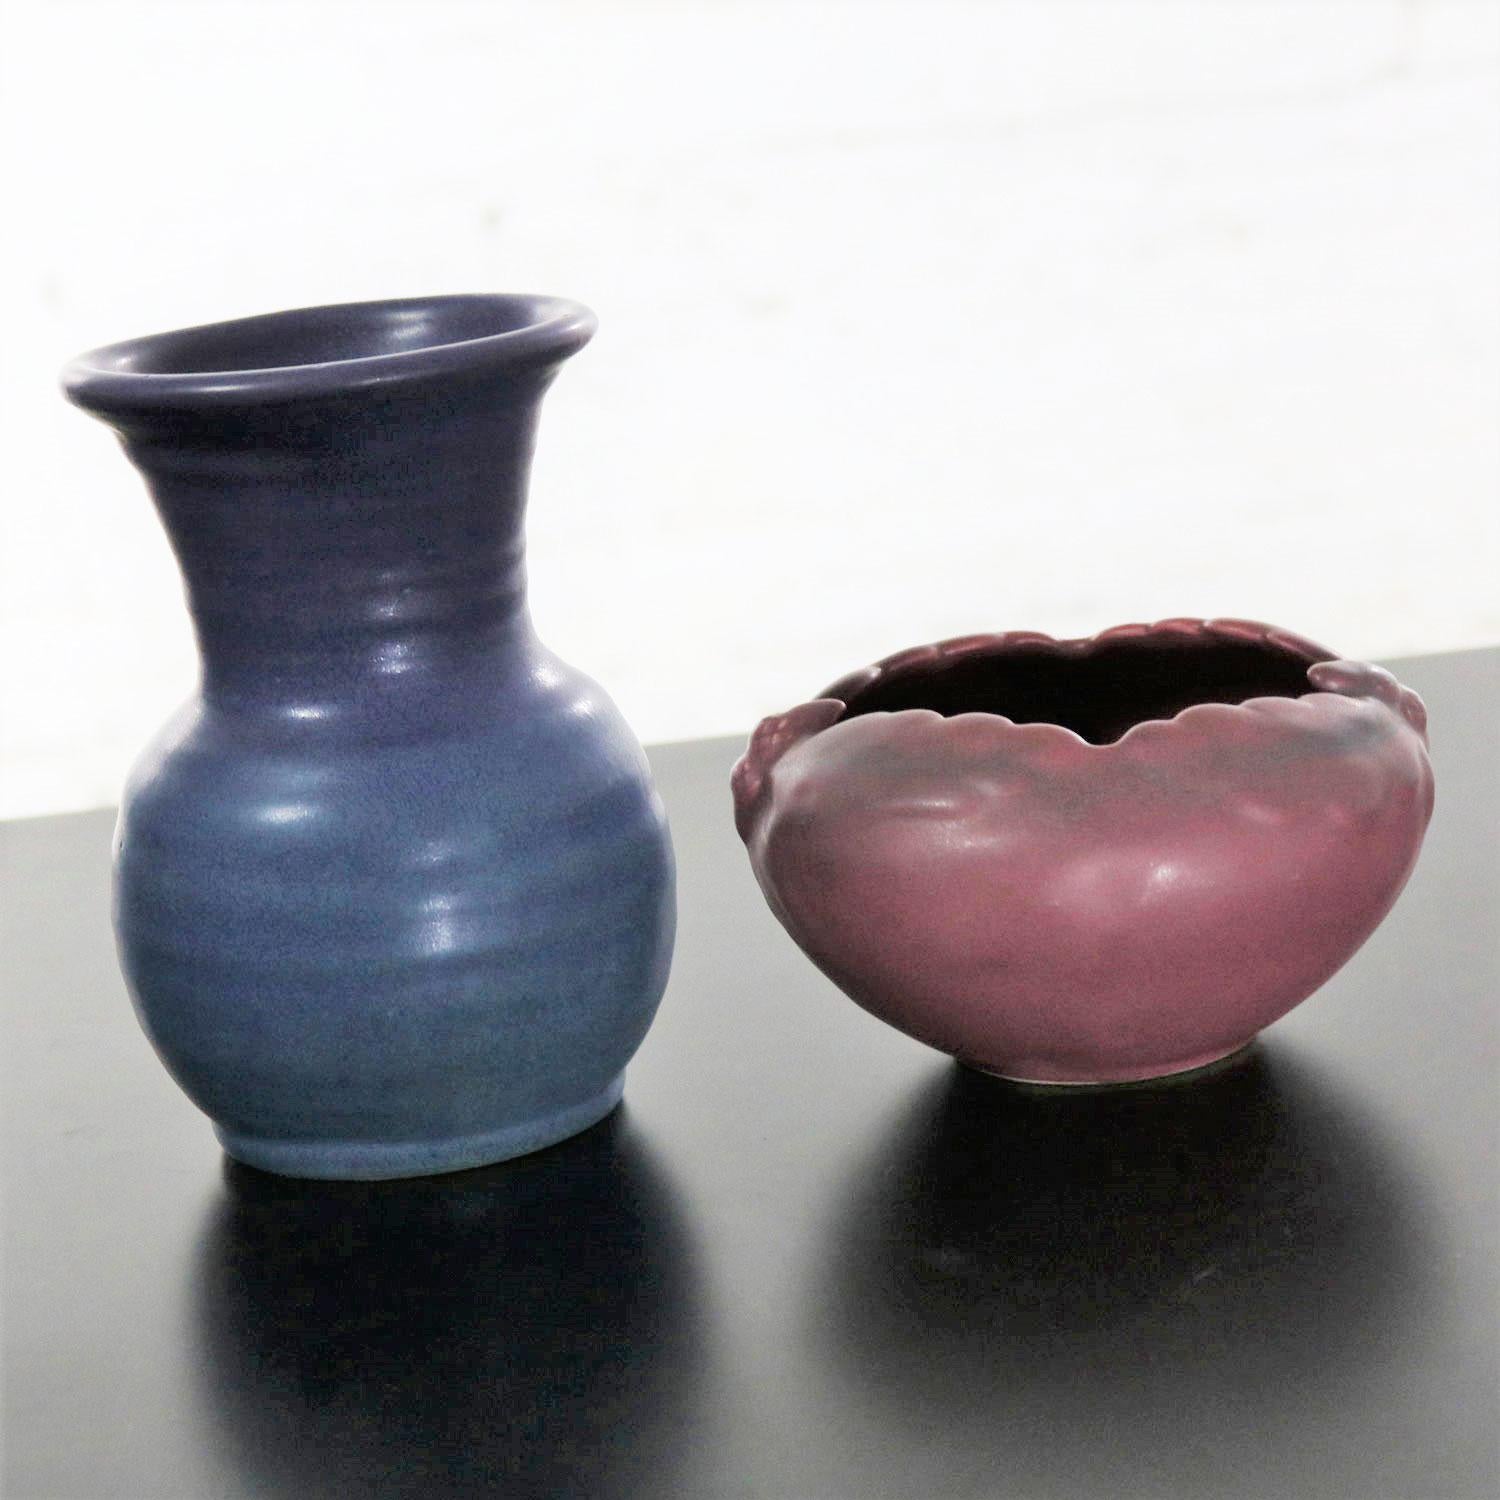 Handsome pair of Van Briggle pottery pieces consisting of an acorn bowl in Persian Rose glaze and a hand thrown vase by Roland Wick in Lilac Blue. Both are in wonderful vintage condition with no chips, cracks, or chiggers. Please see photos. Bowl is